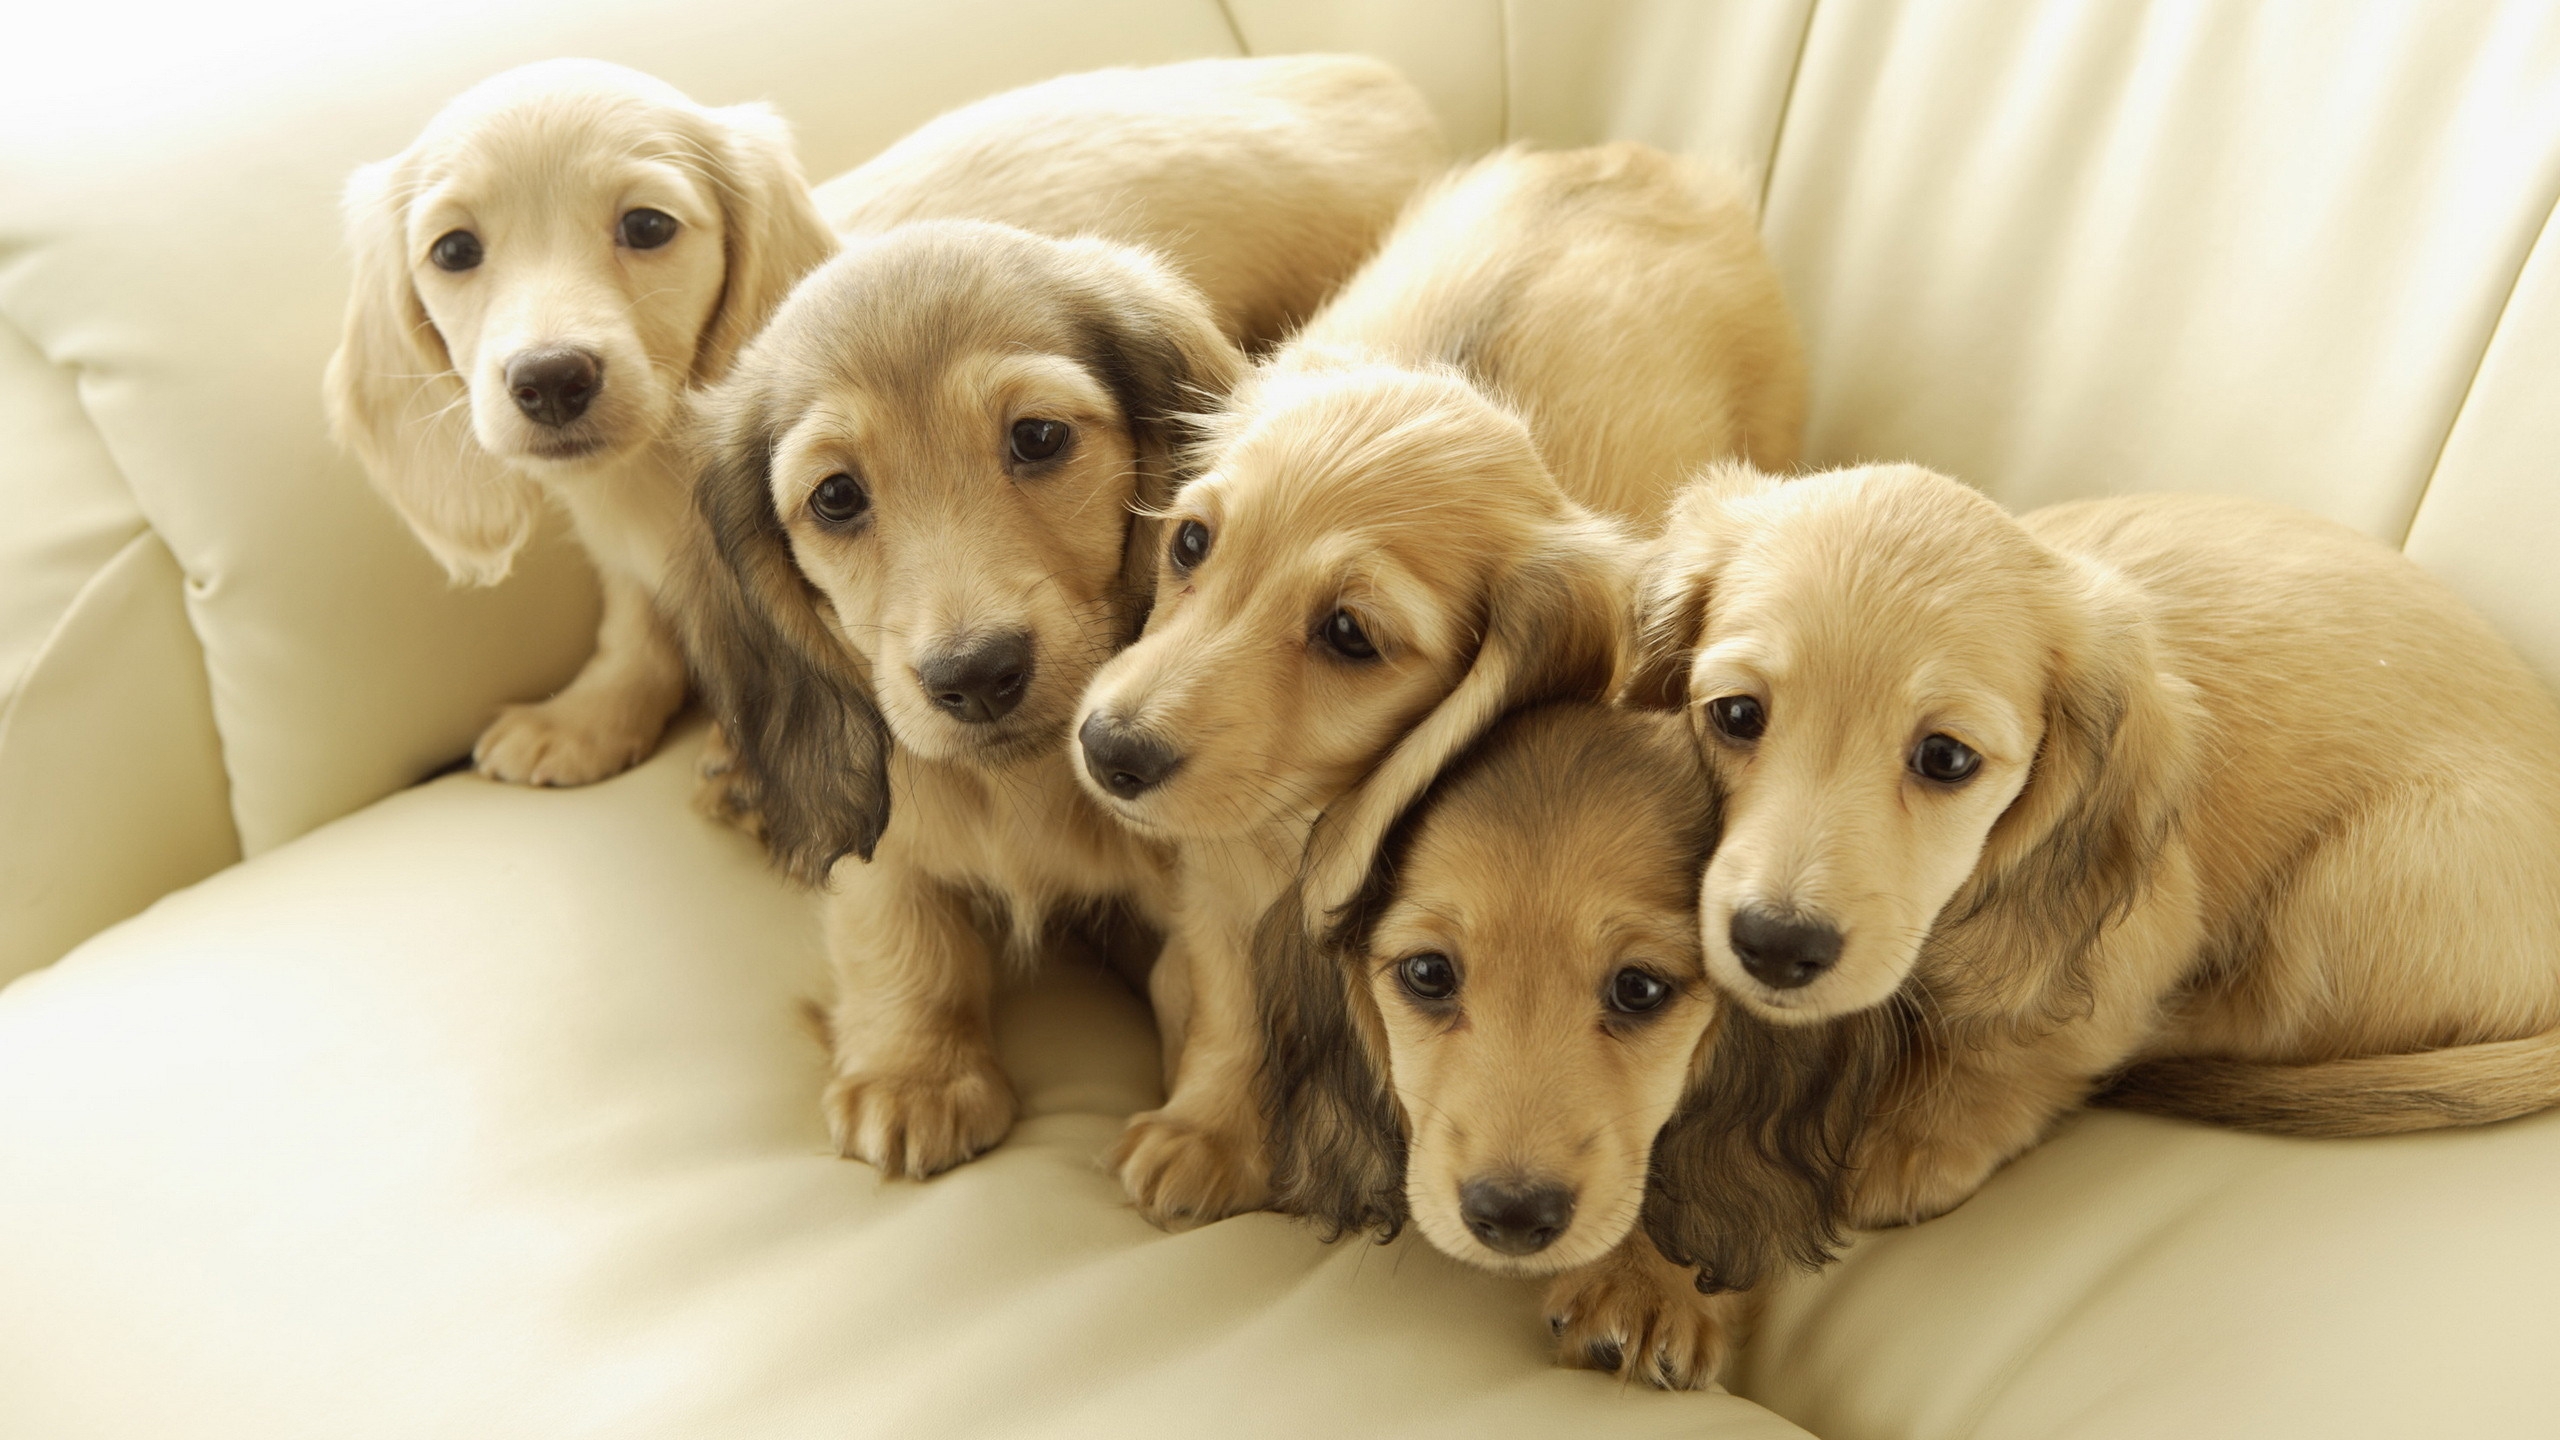 Five Cute Puppies for 2560x1440 HDTV resolution